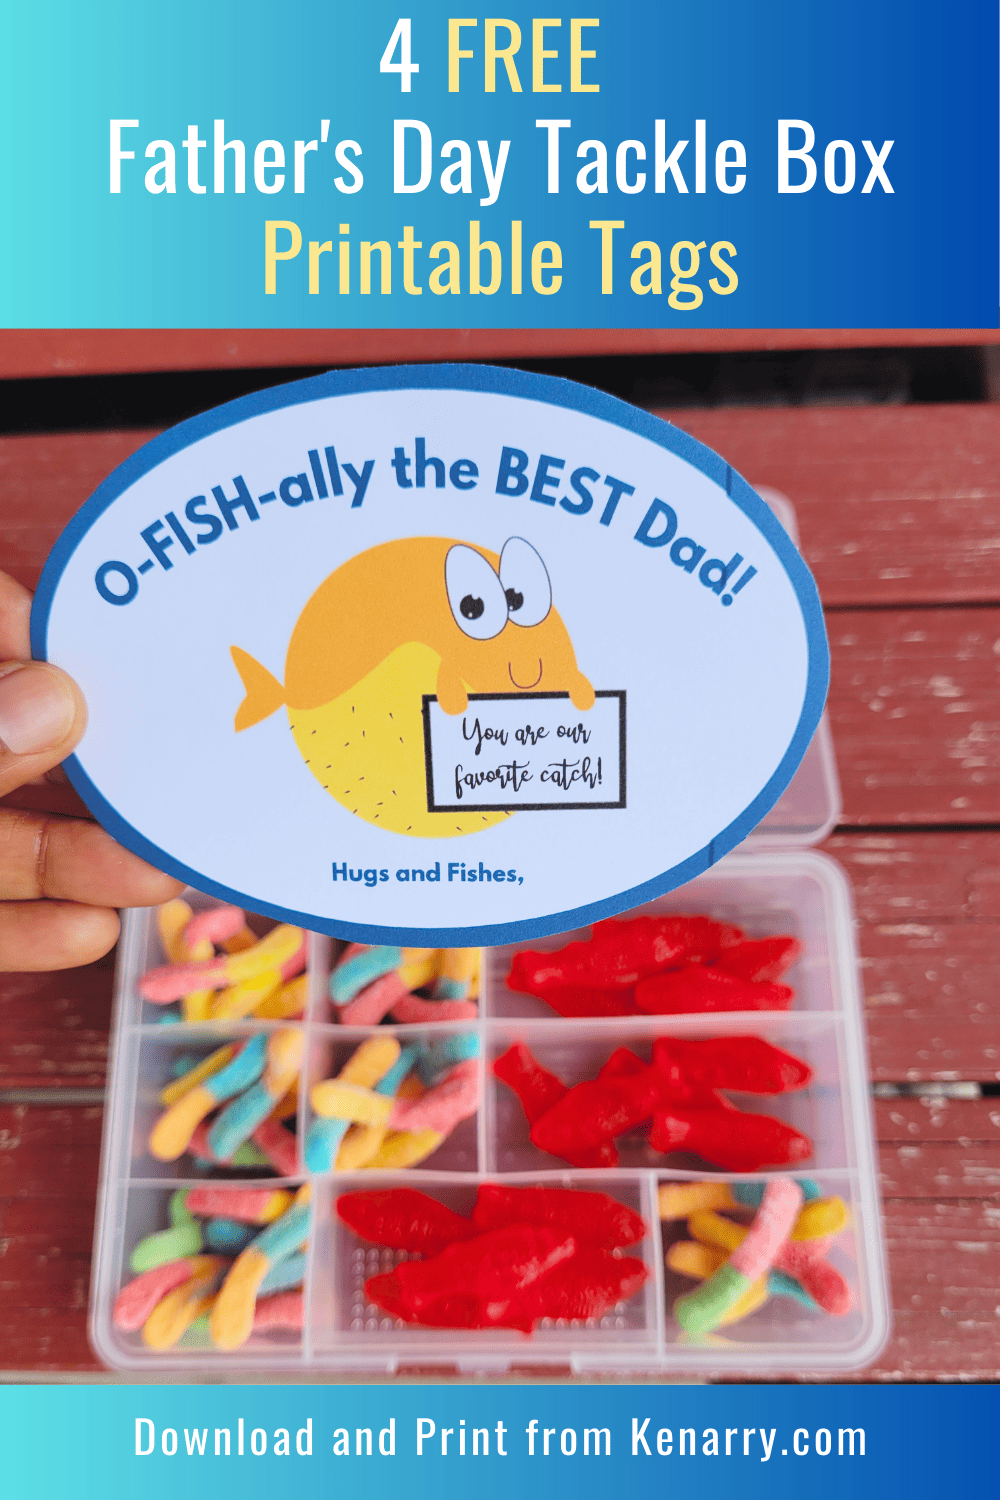 Free Printable Father's Day tackle box tags 